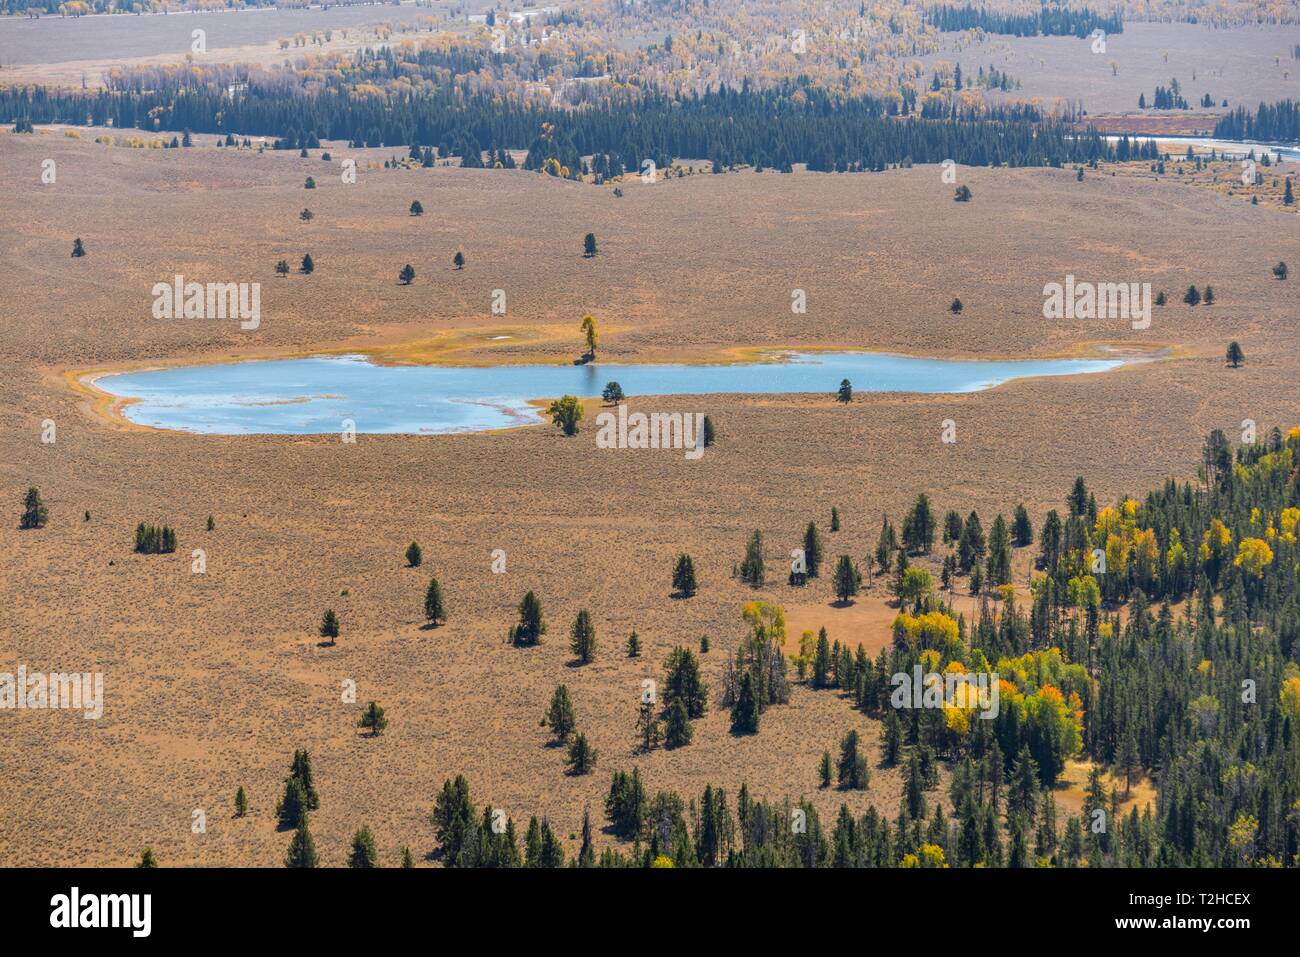 View of a small lake in a dry landscape, Grand-Teton National Park, Wyoming, USA Stock Photo